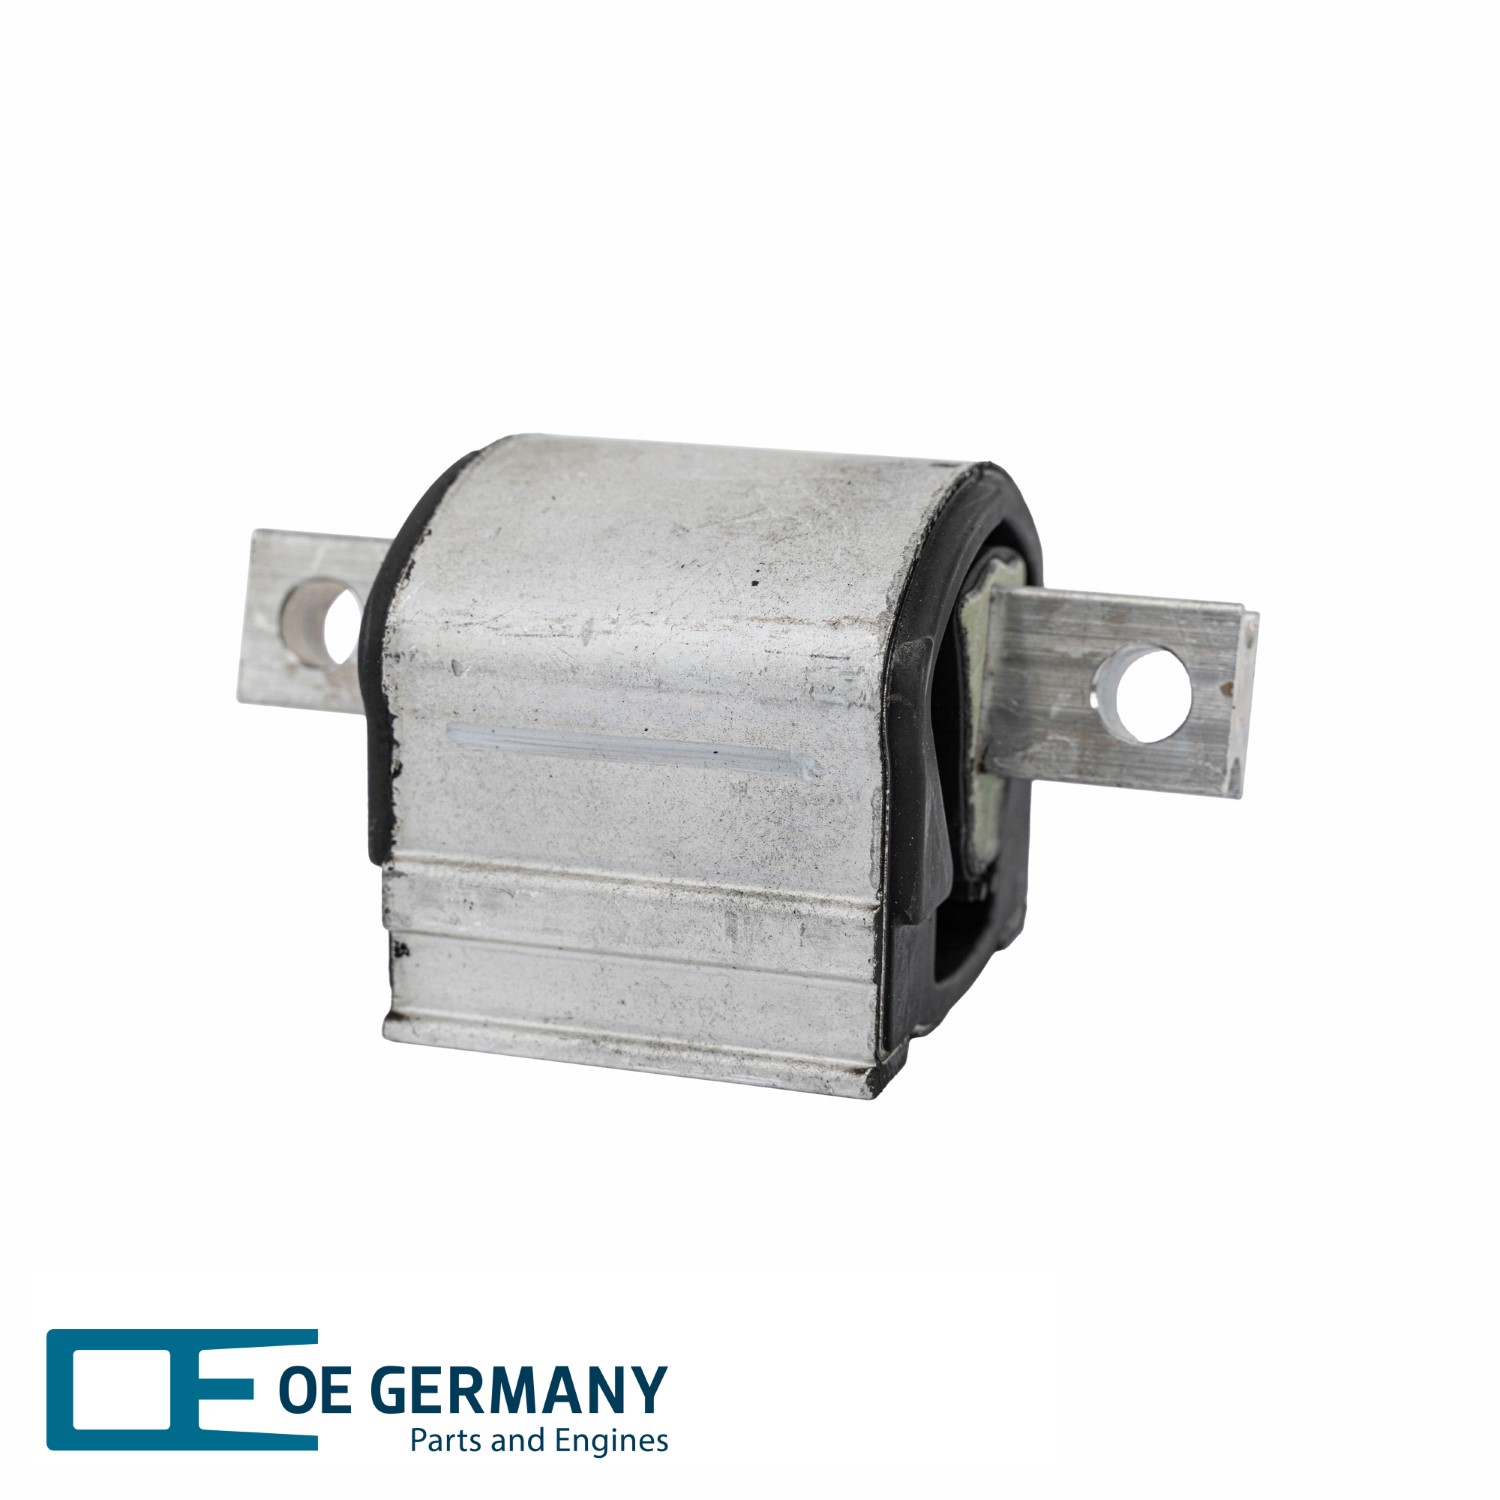 OE Germany Differentieel ophangrubber 800601